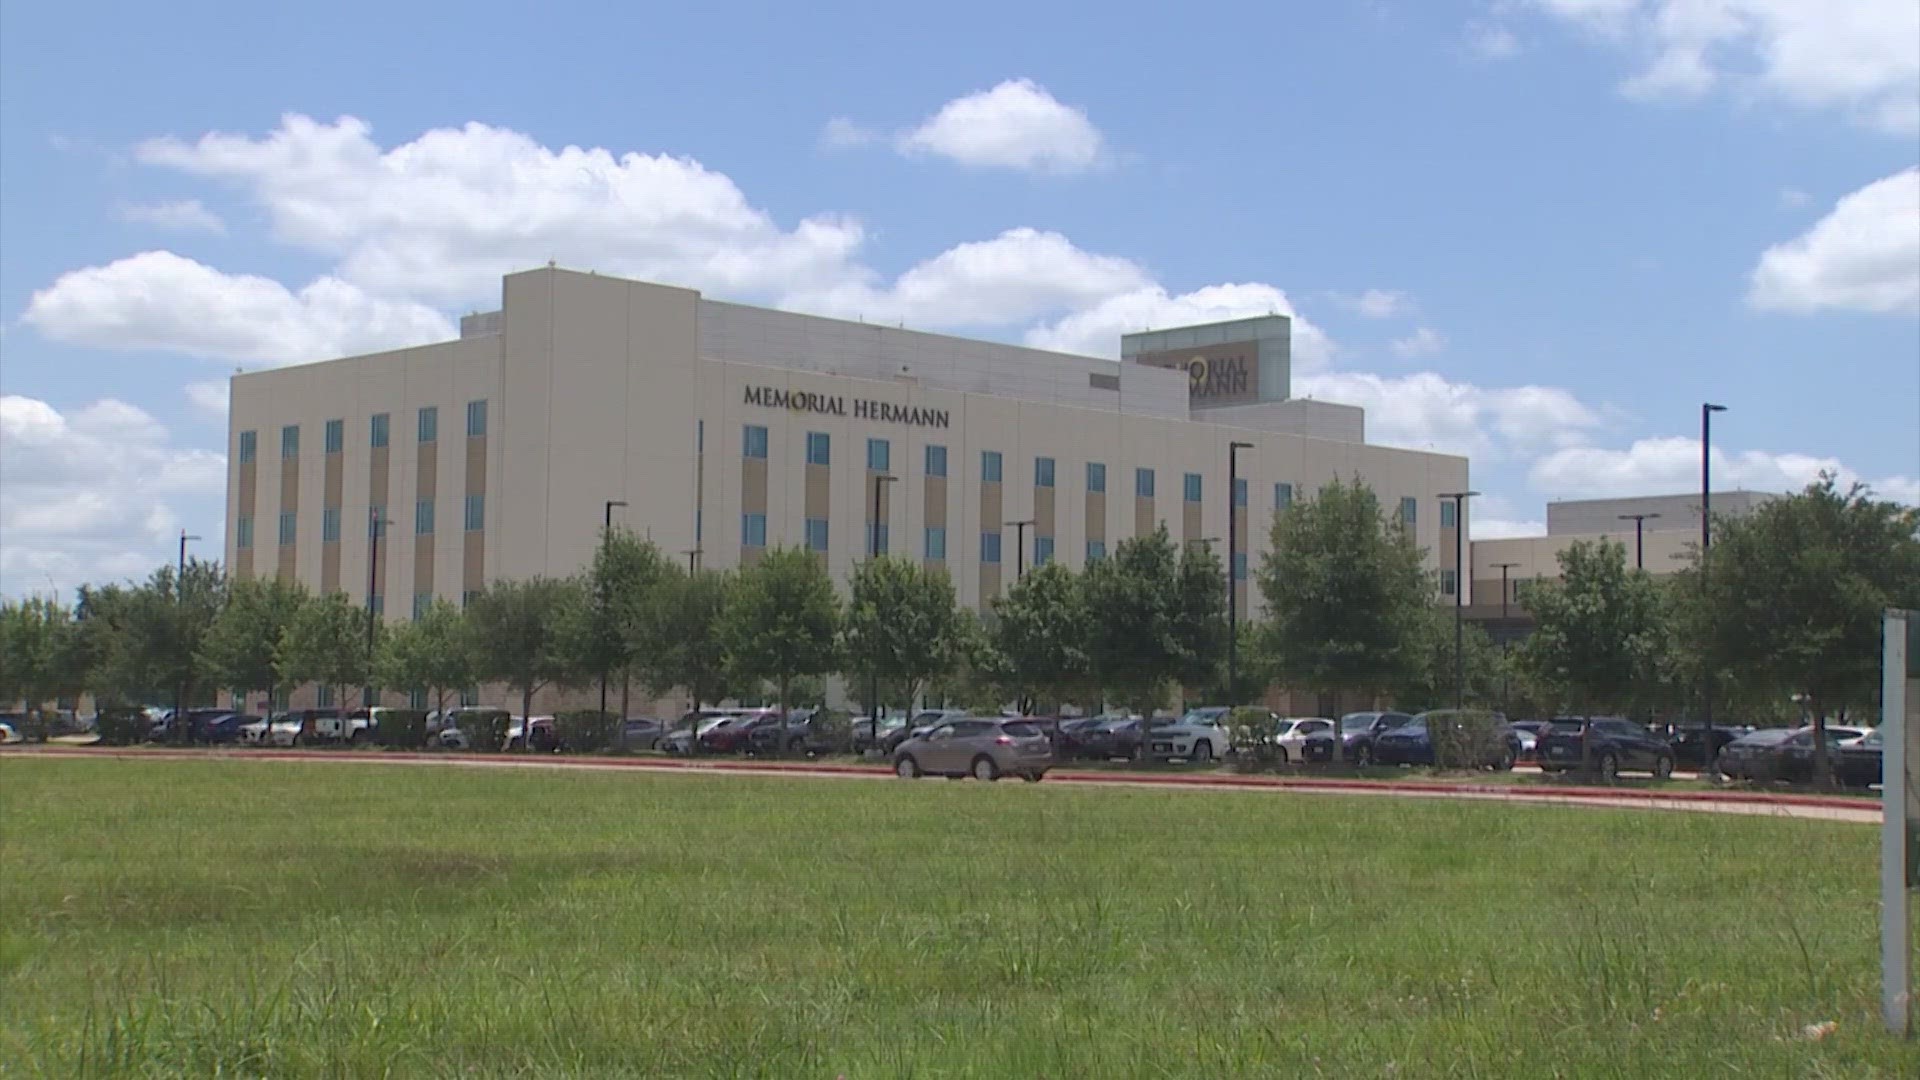 Memorial Hermann officials didn't release specifics but said the issue is with data.